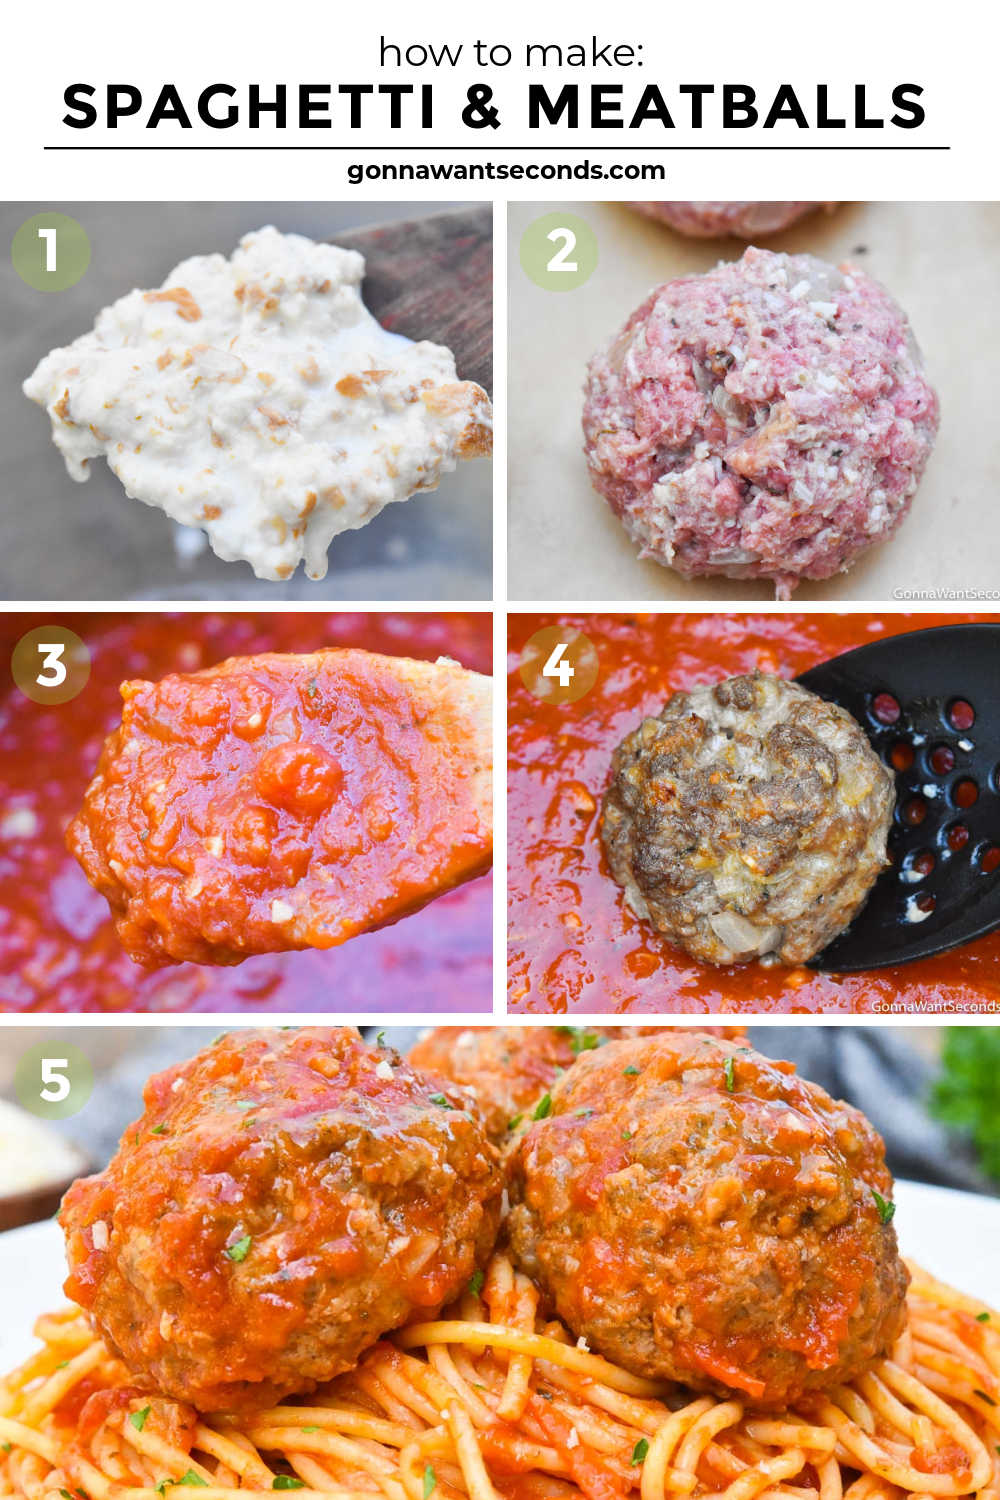 step by step how to make spaghetti and meatballs